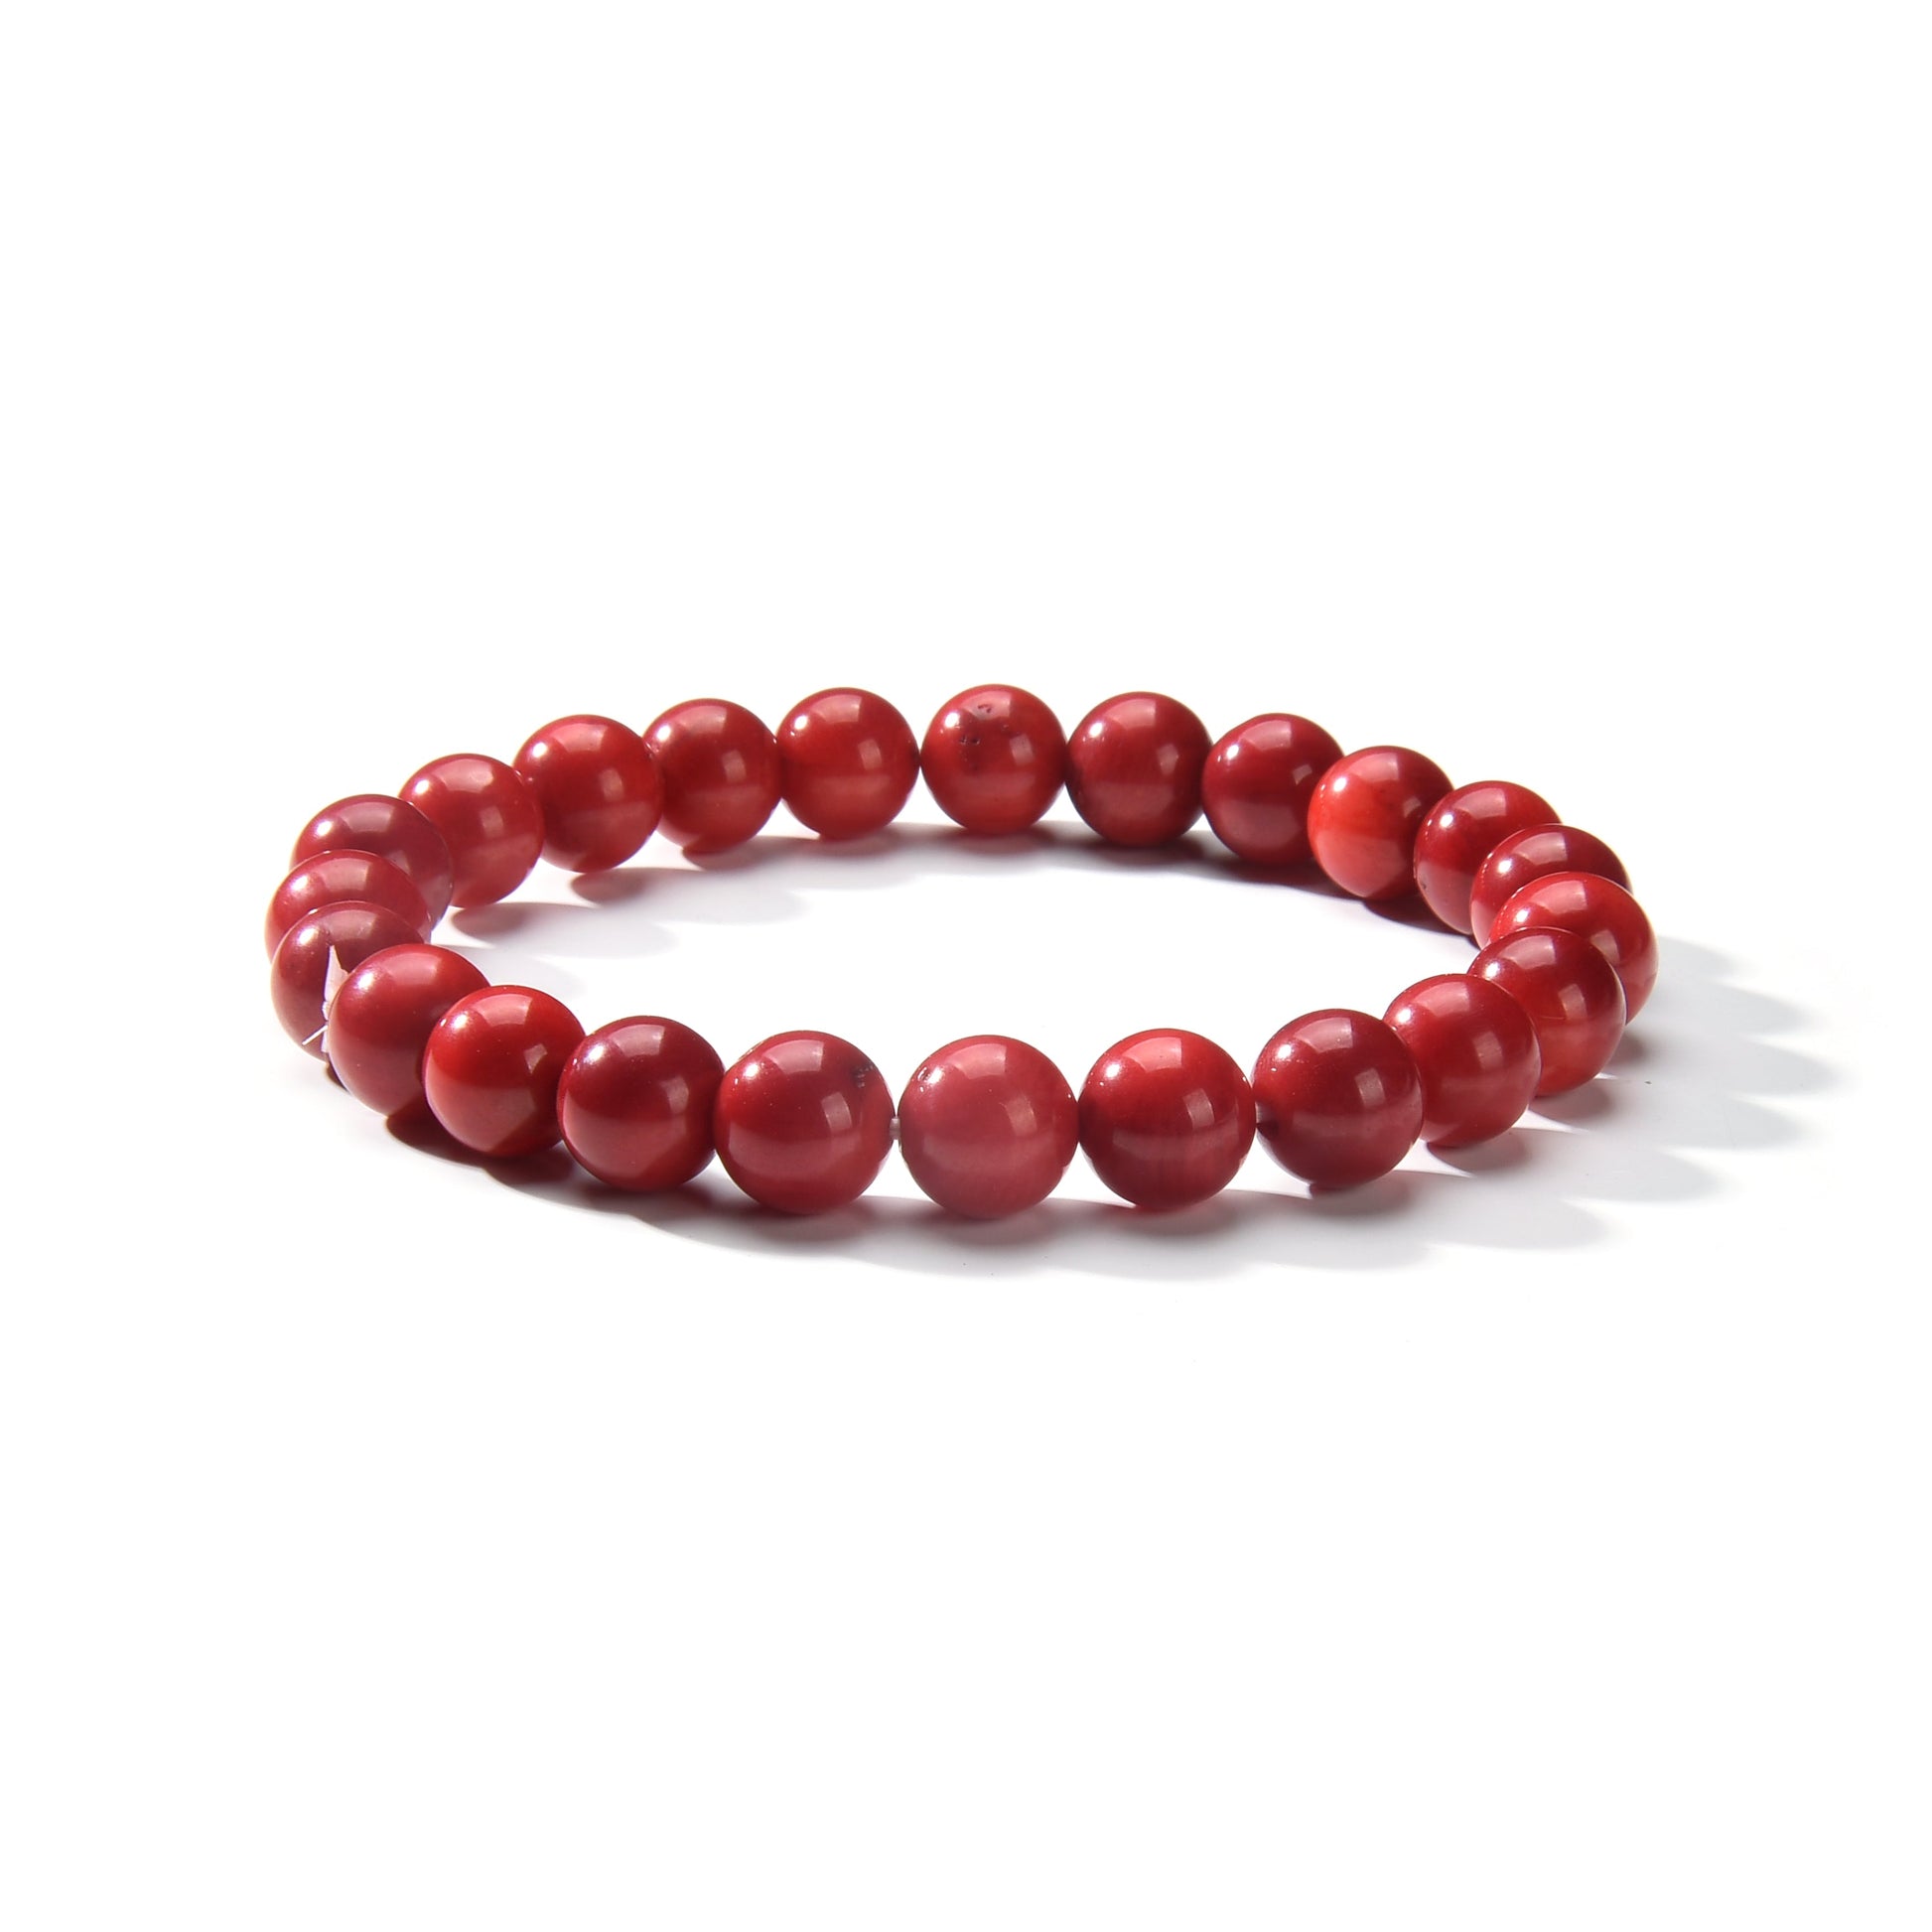 Red Bamboo Coral Round Beads Bracelet 8mm